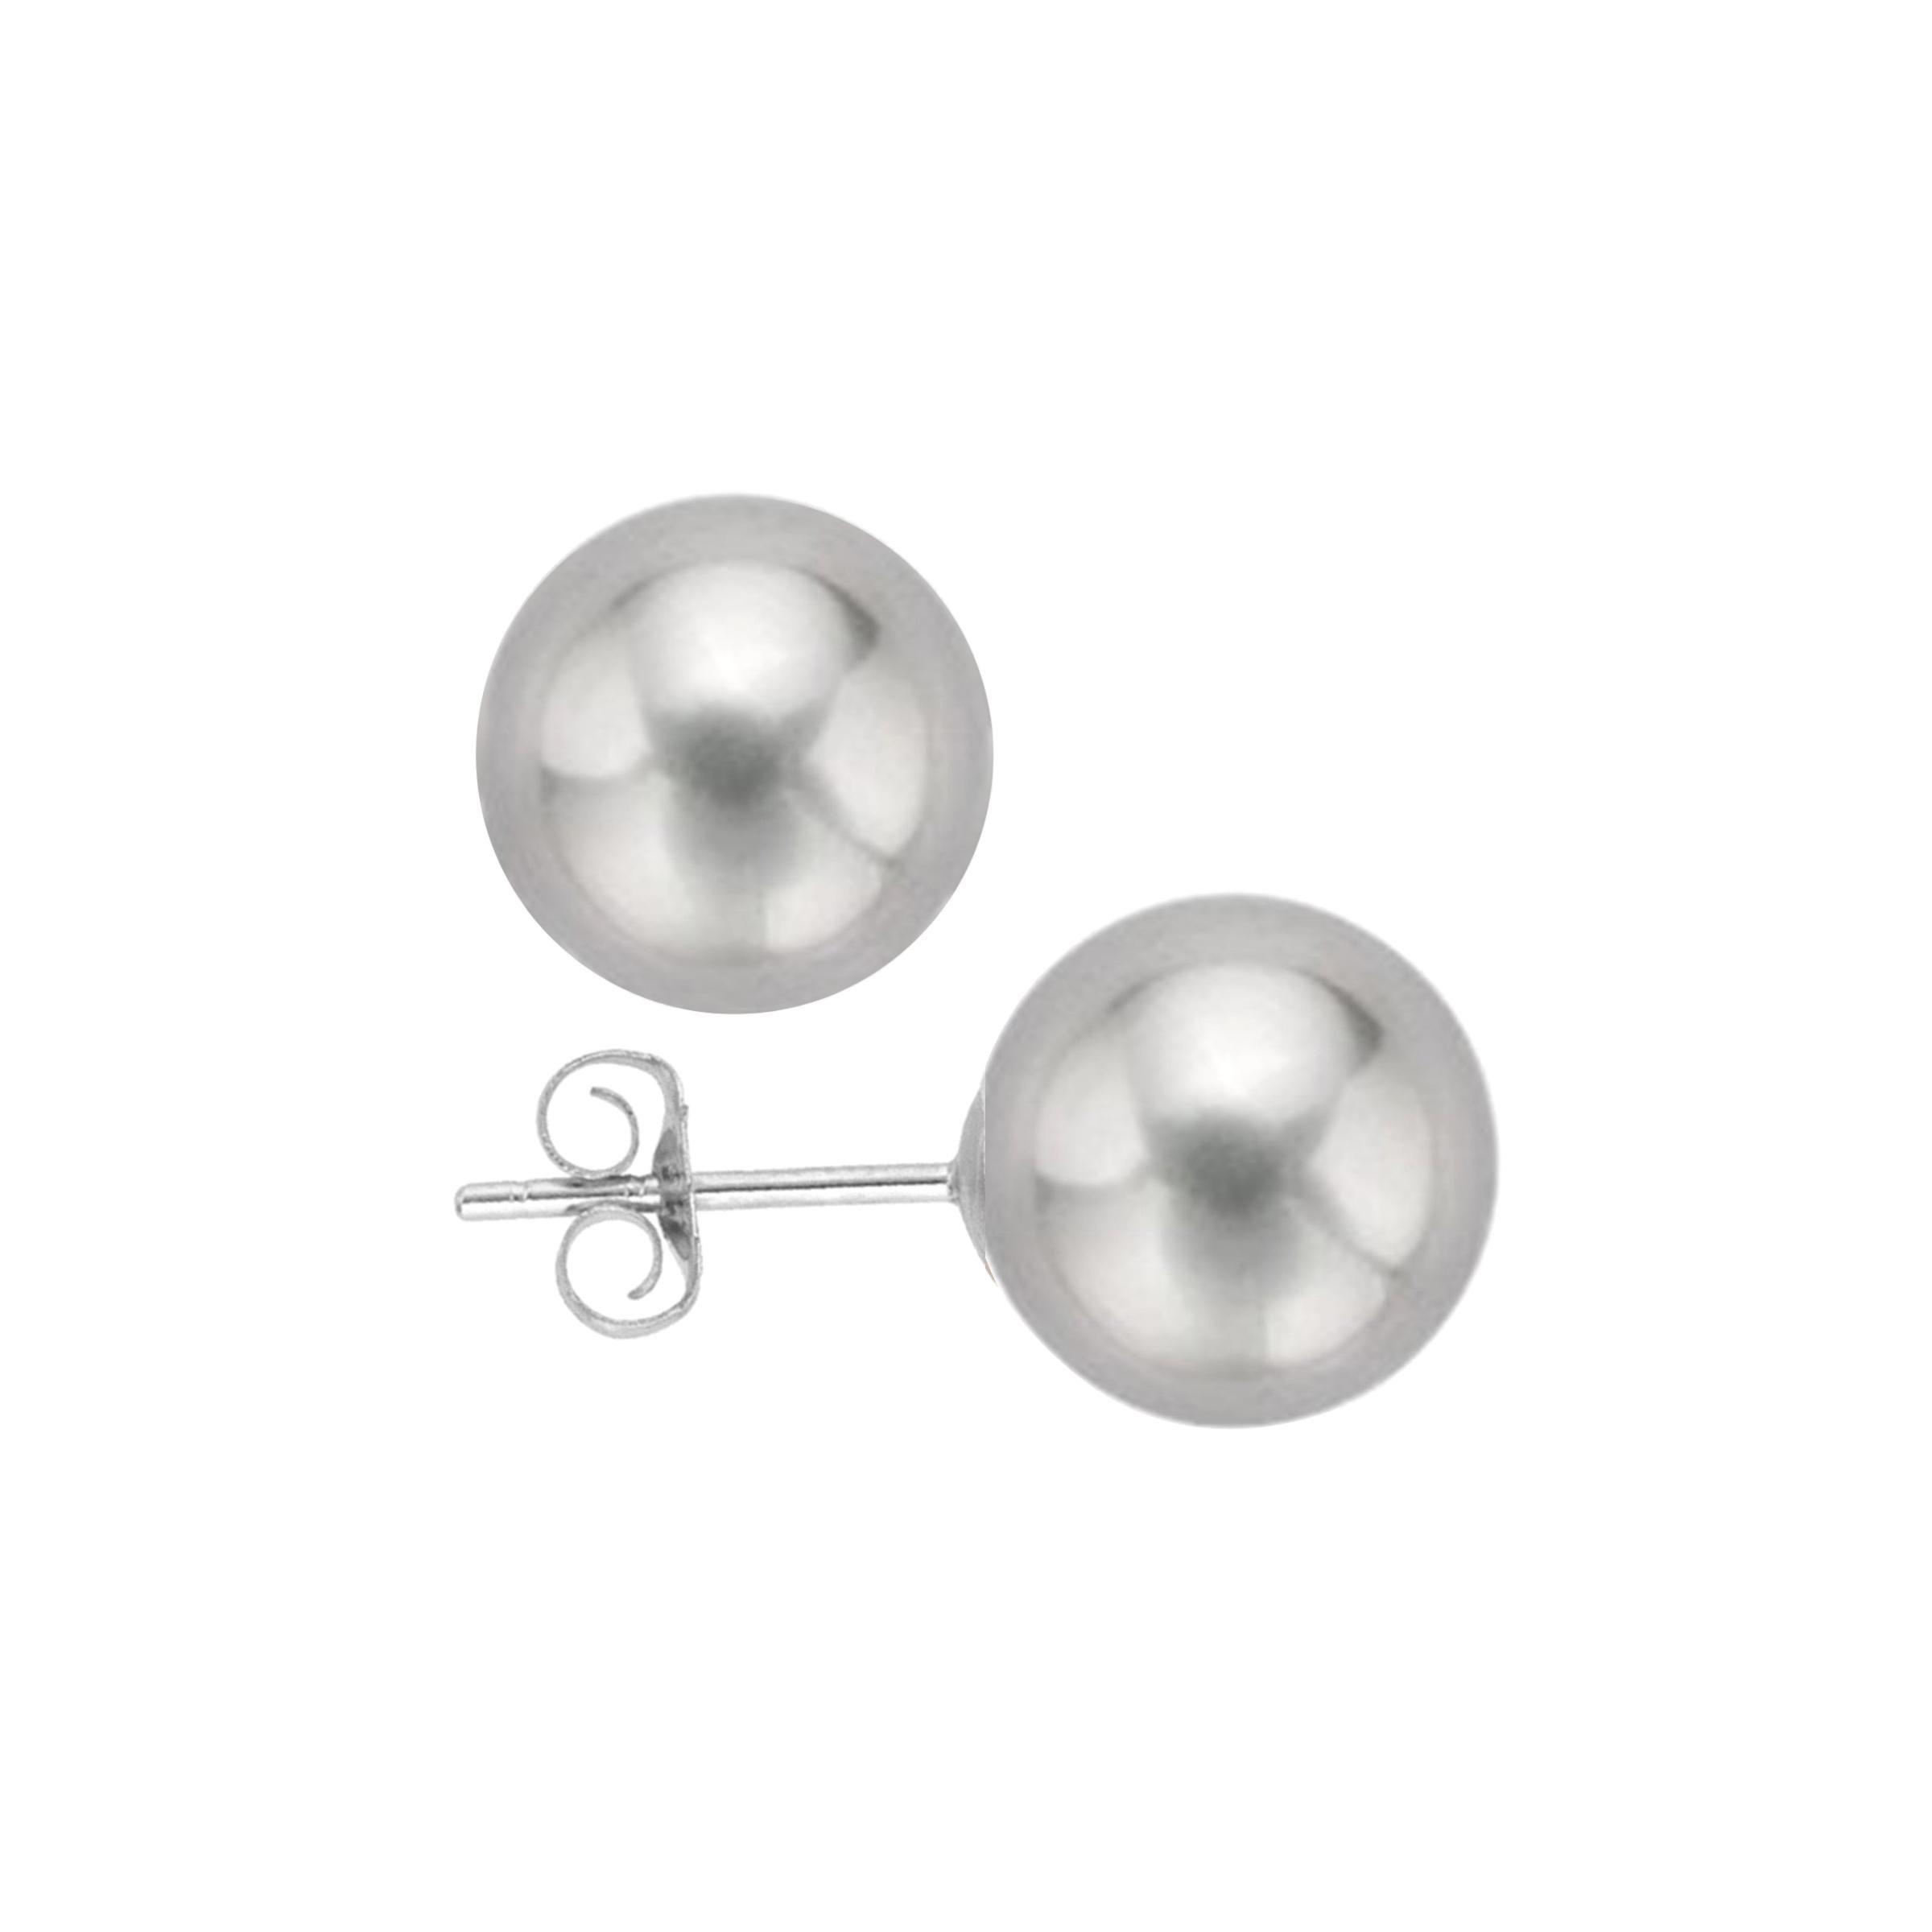 AAA Quality Grey Freshwater Cultured Pearl Earring Stud on 14 Karat White Gold